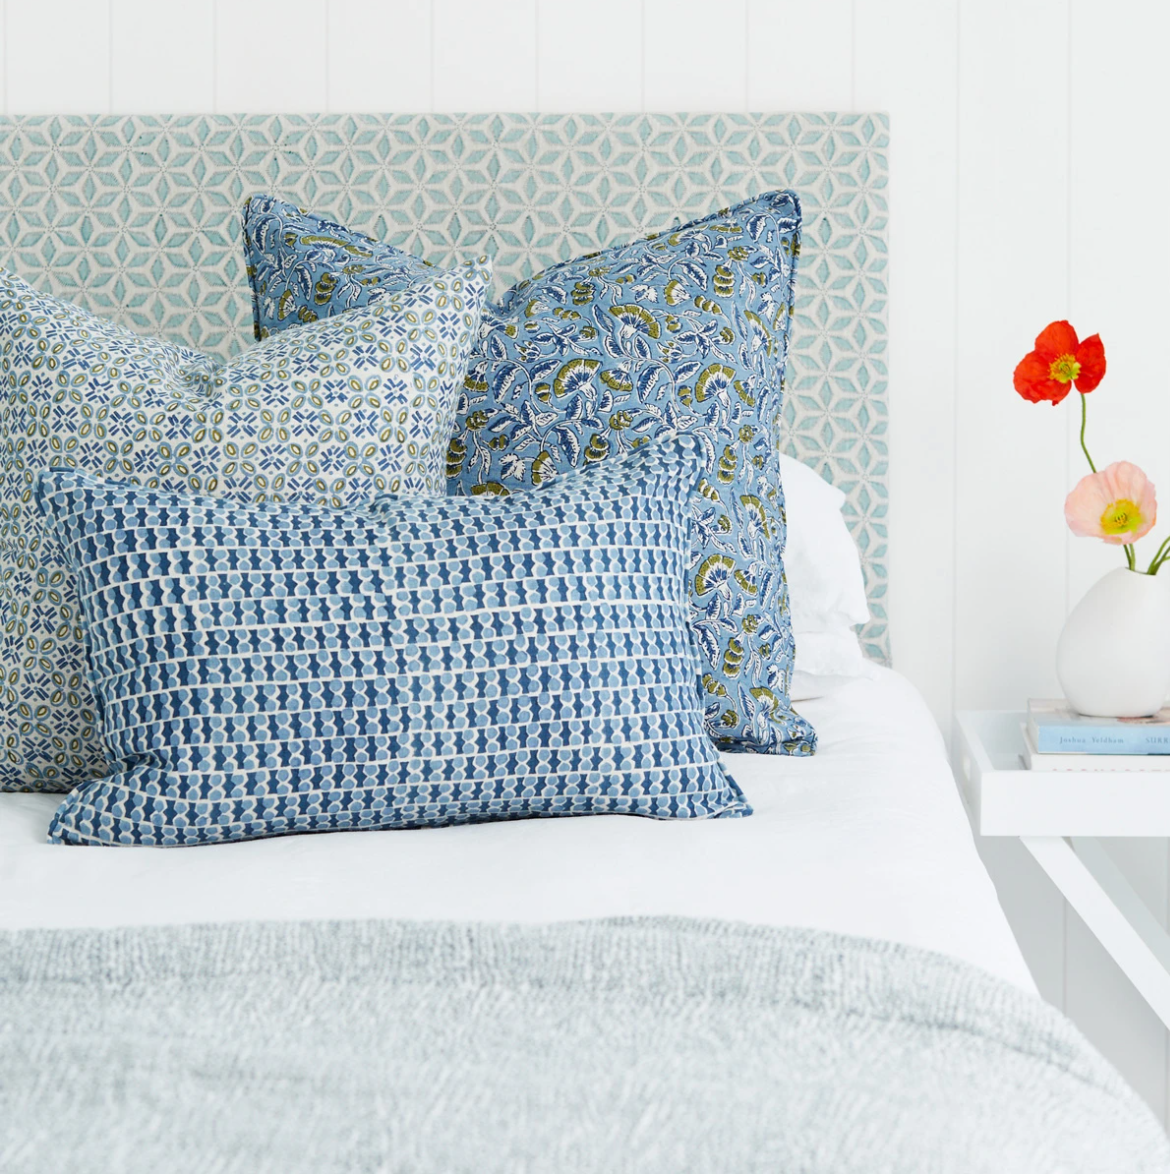 blue and green mix of pillows on bed